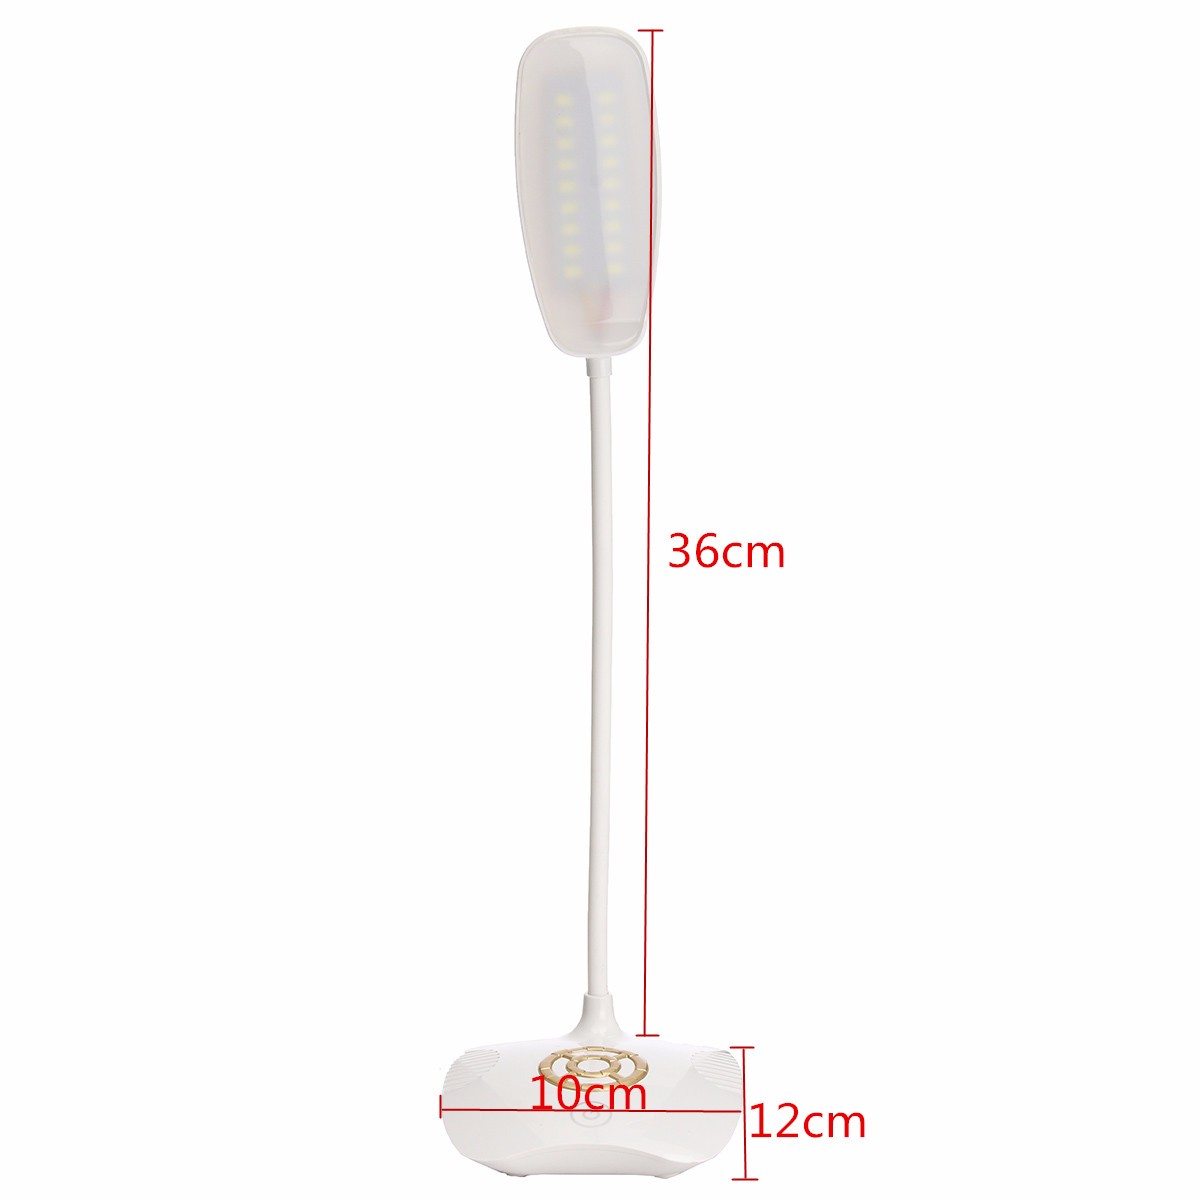 Flexible-Rechargeable-Dimmable-USB-LED-Night-Light-Bedside-Desktop-Reading-Table-Lamp-1118136-9